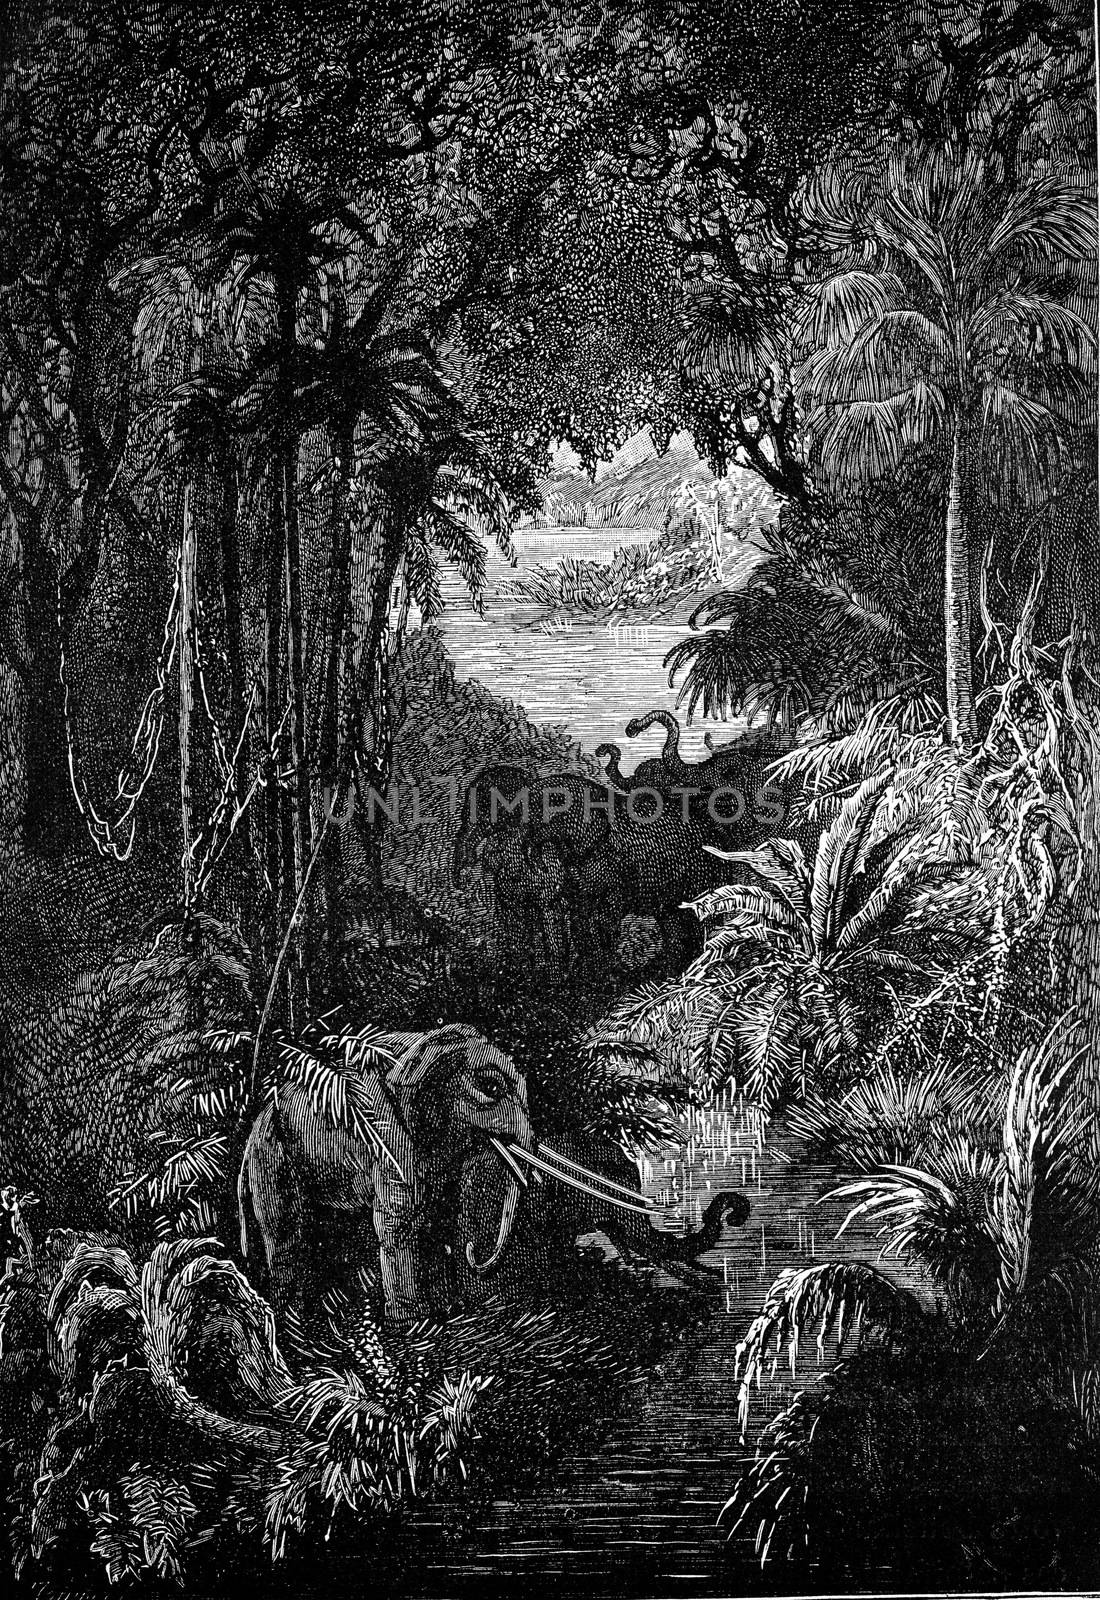 Wild and impenetrable forests, vintage engraved illustration. Earth before man – 1886.
